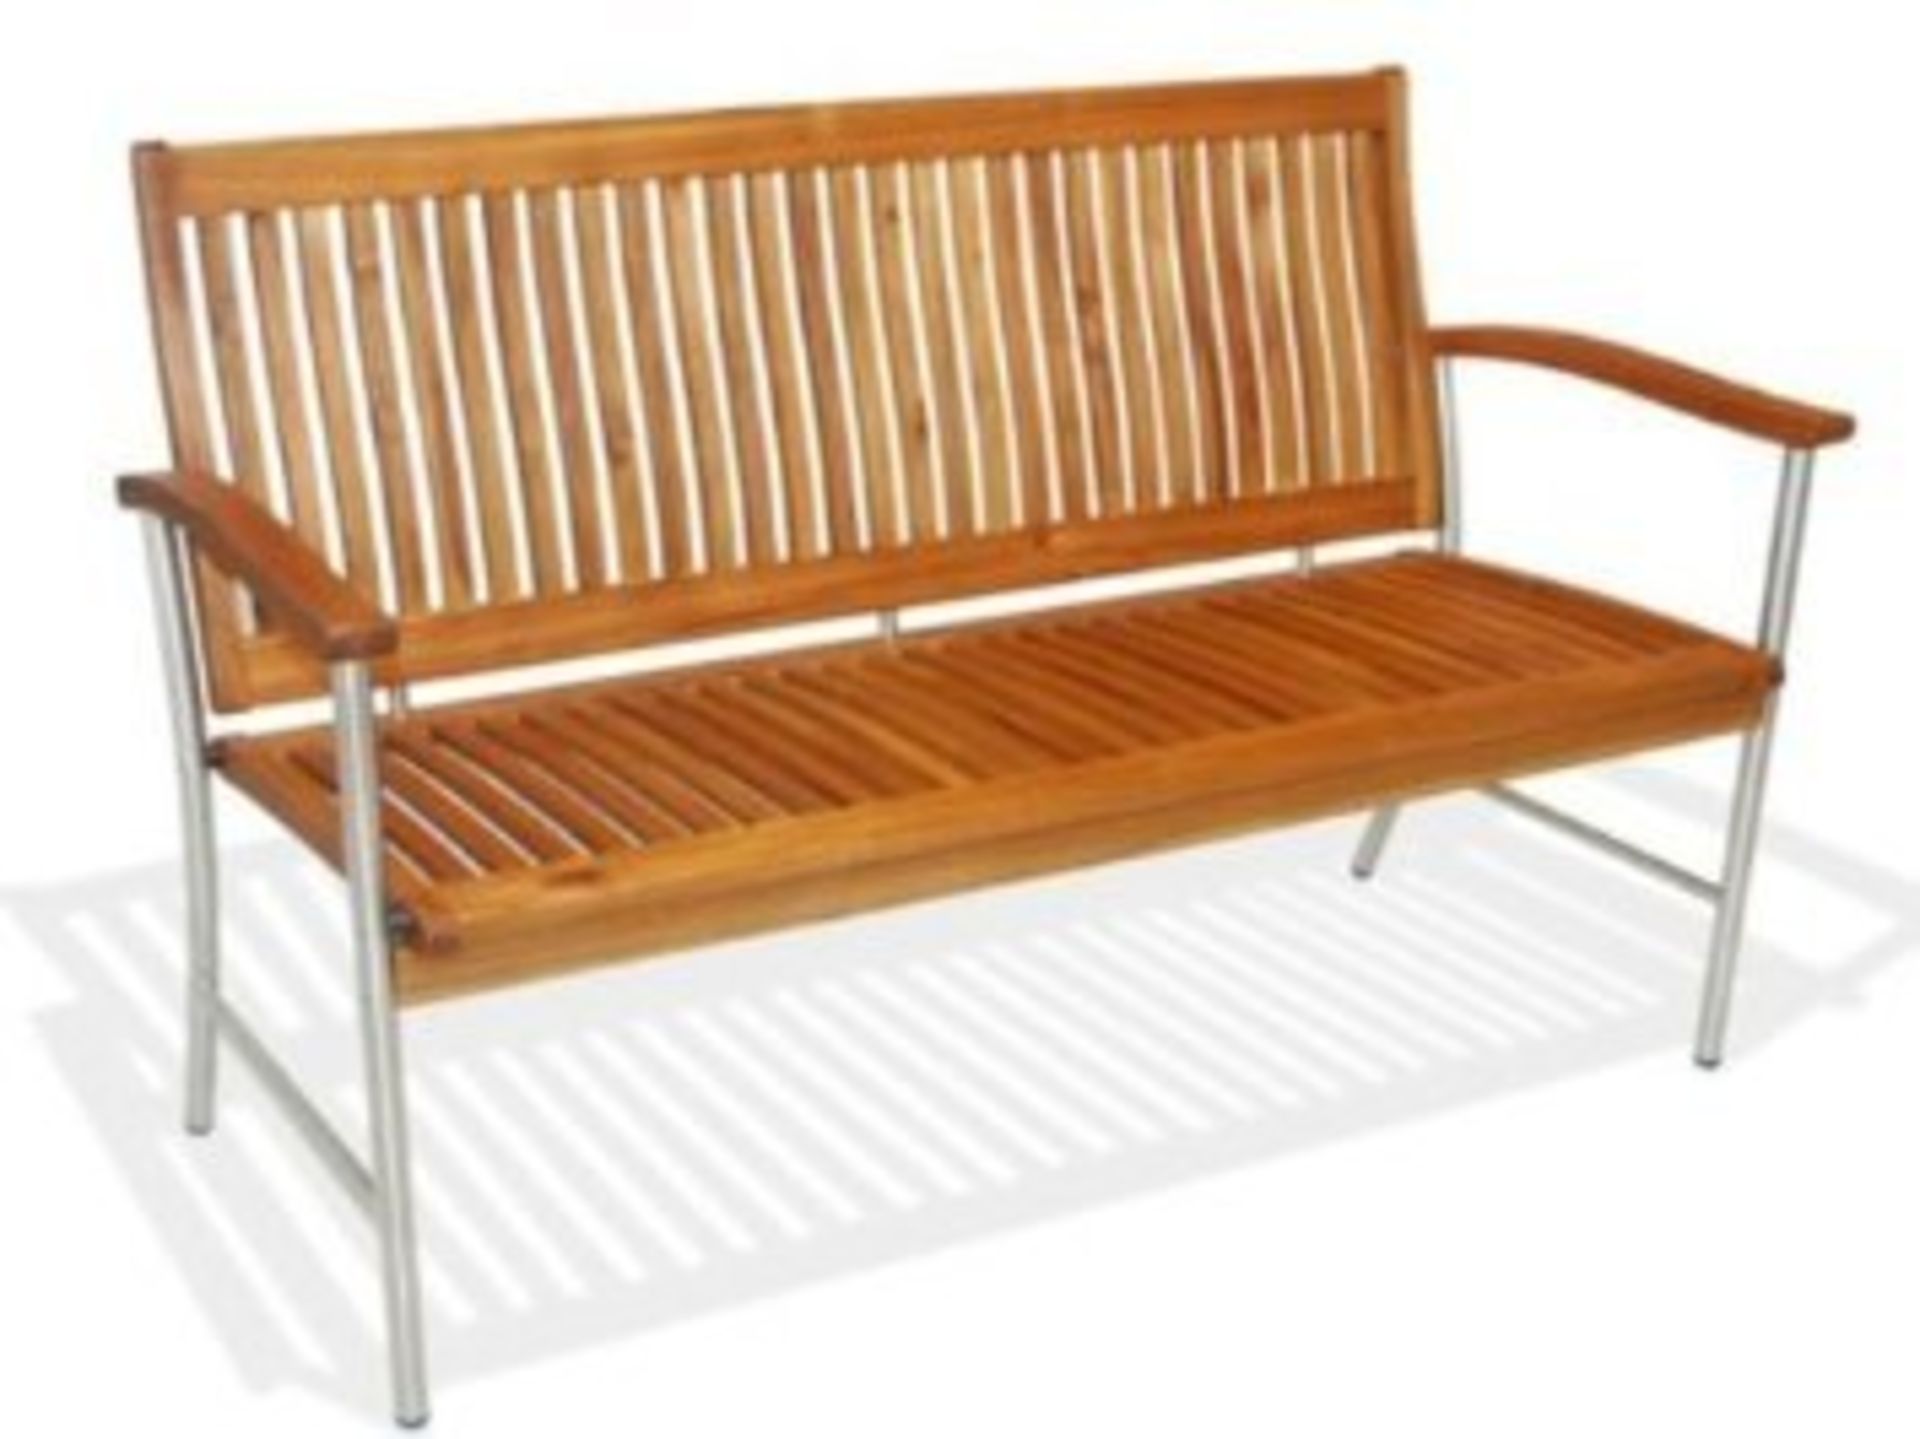 V Brand New Landkawi 2 Seater Bench With Stainless Steel Frame And Acacia Seat/Backrest/Arm Cover